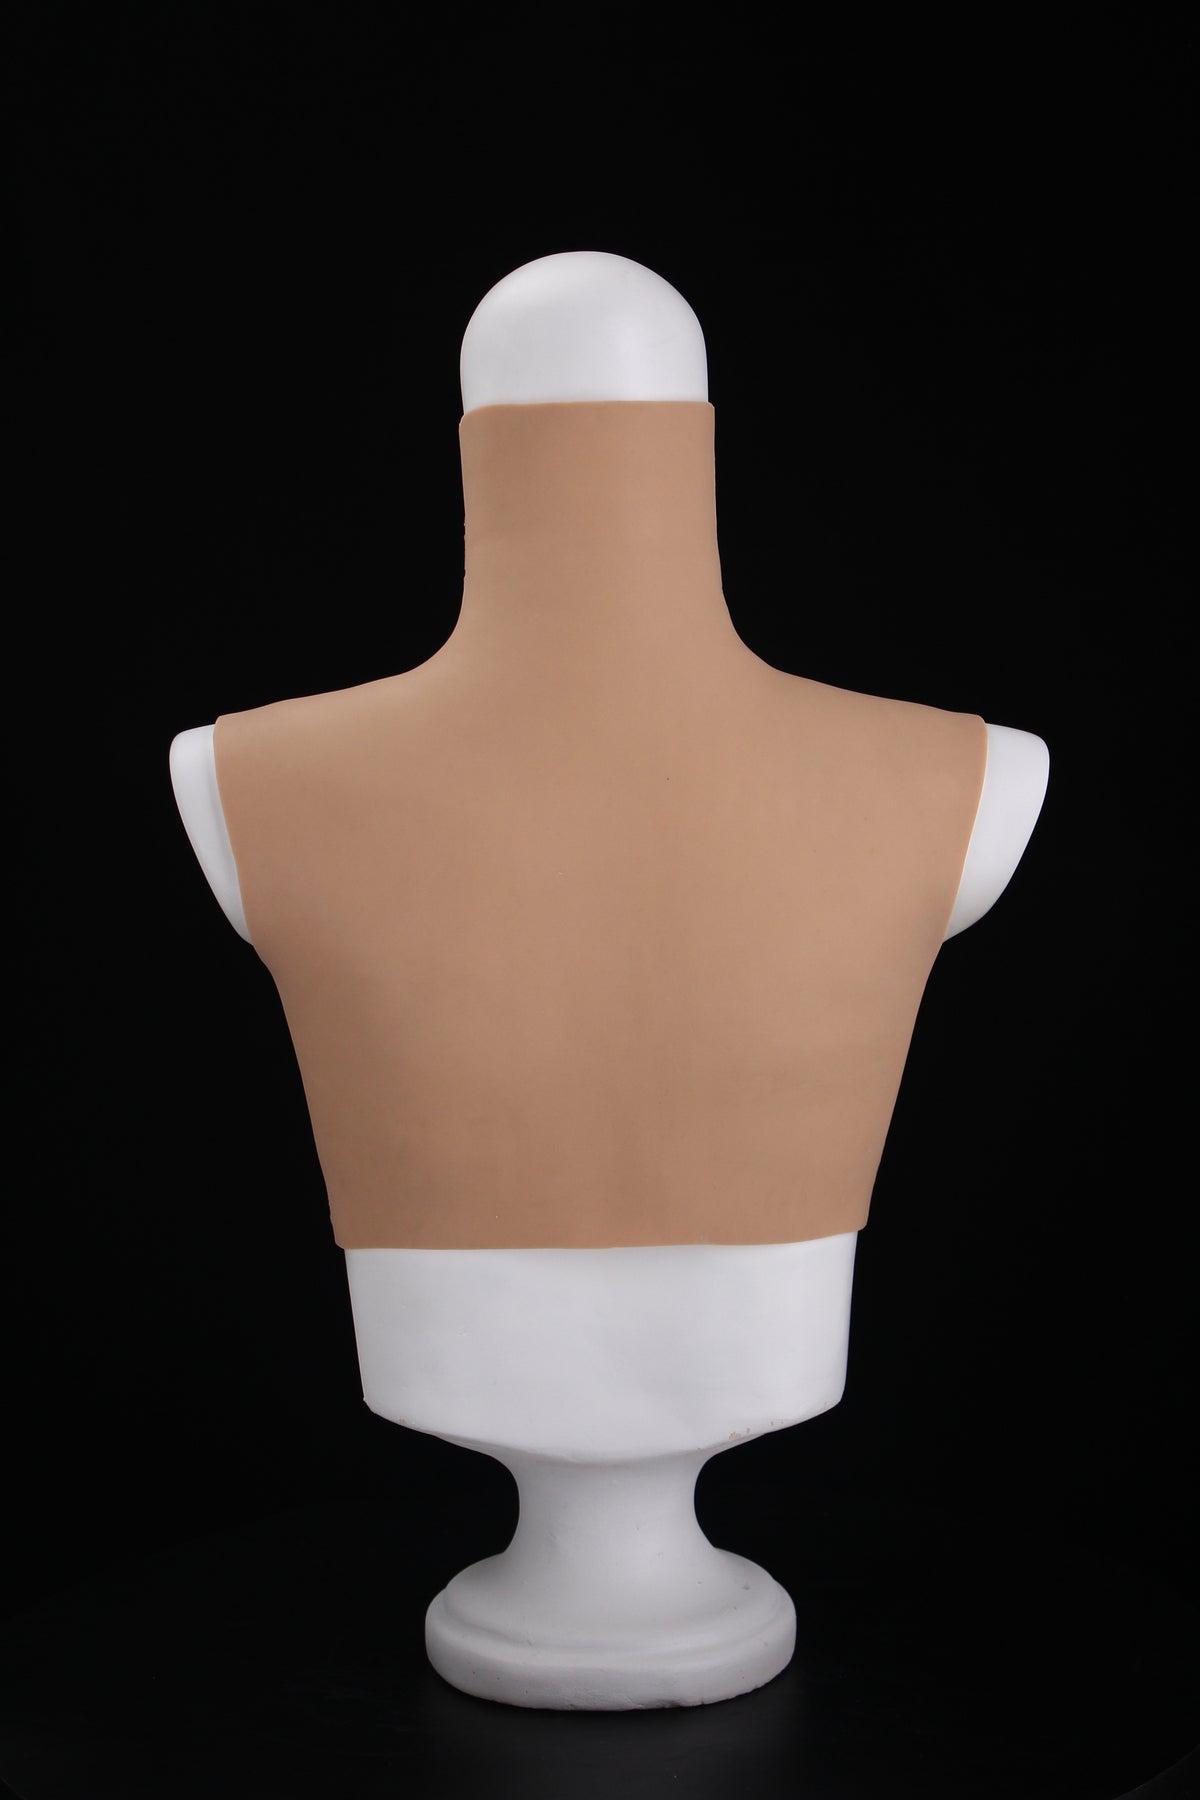 Realistic Wearable Silicone Crop Top Shirt with Breast Form